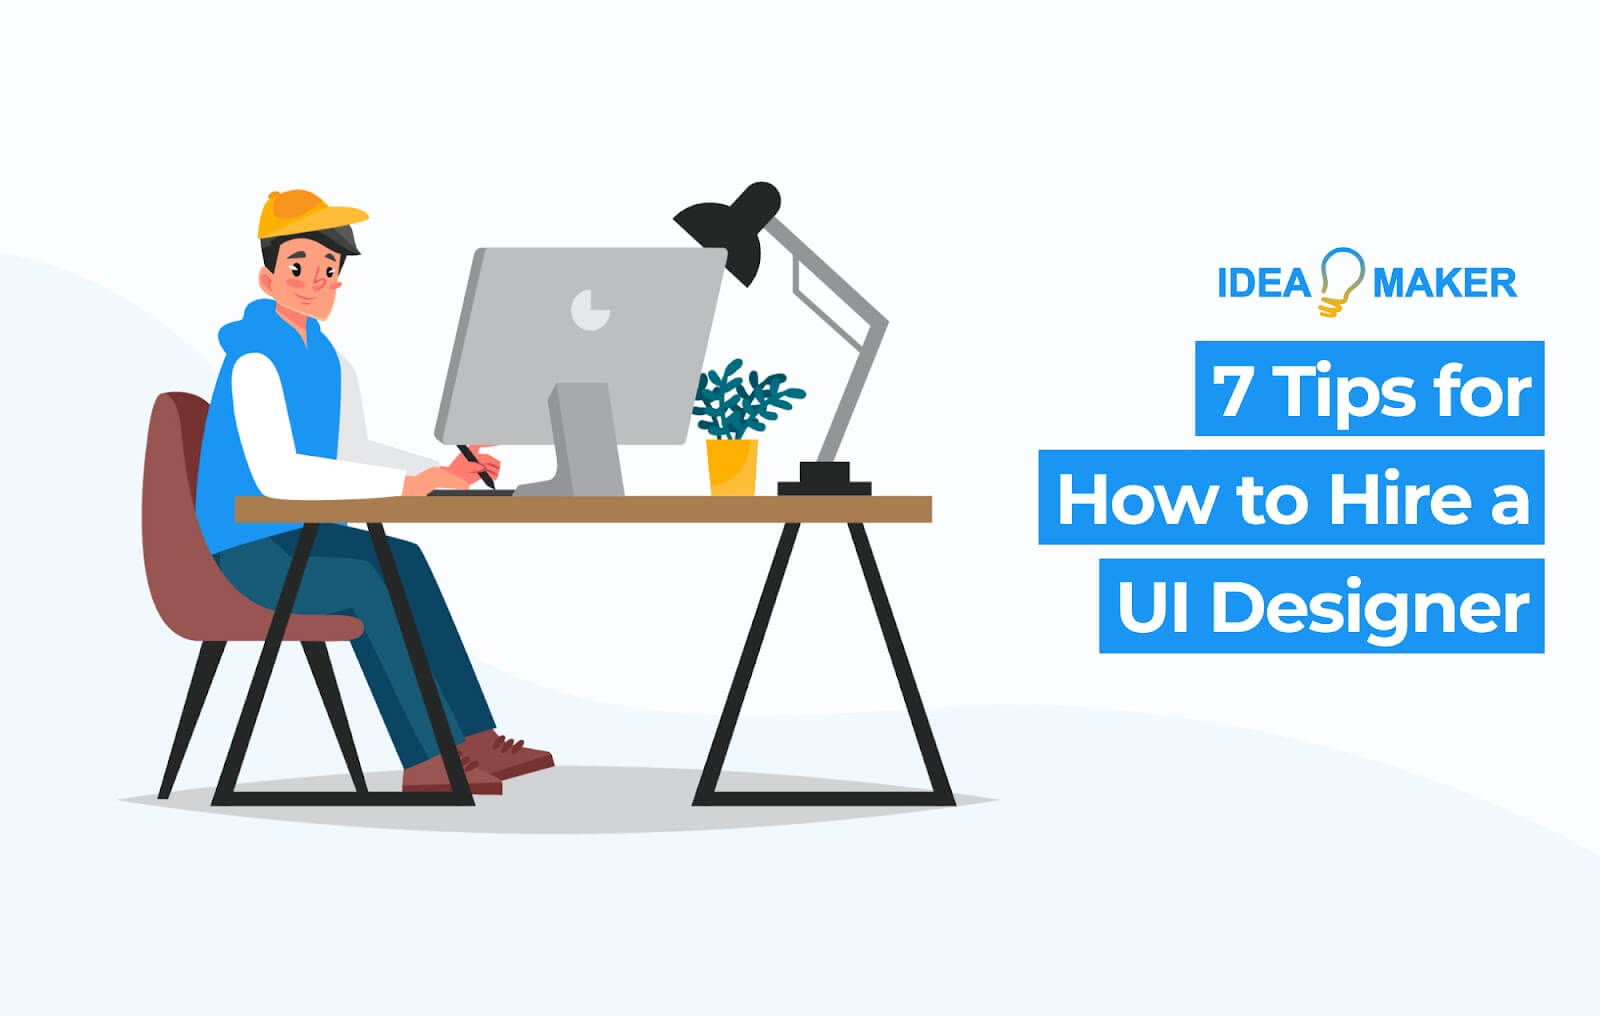 7 Tips for How to Hire a UI Designer